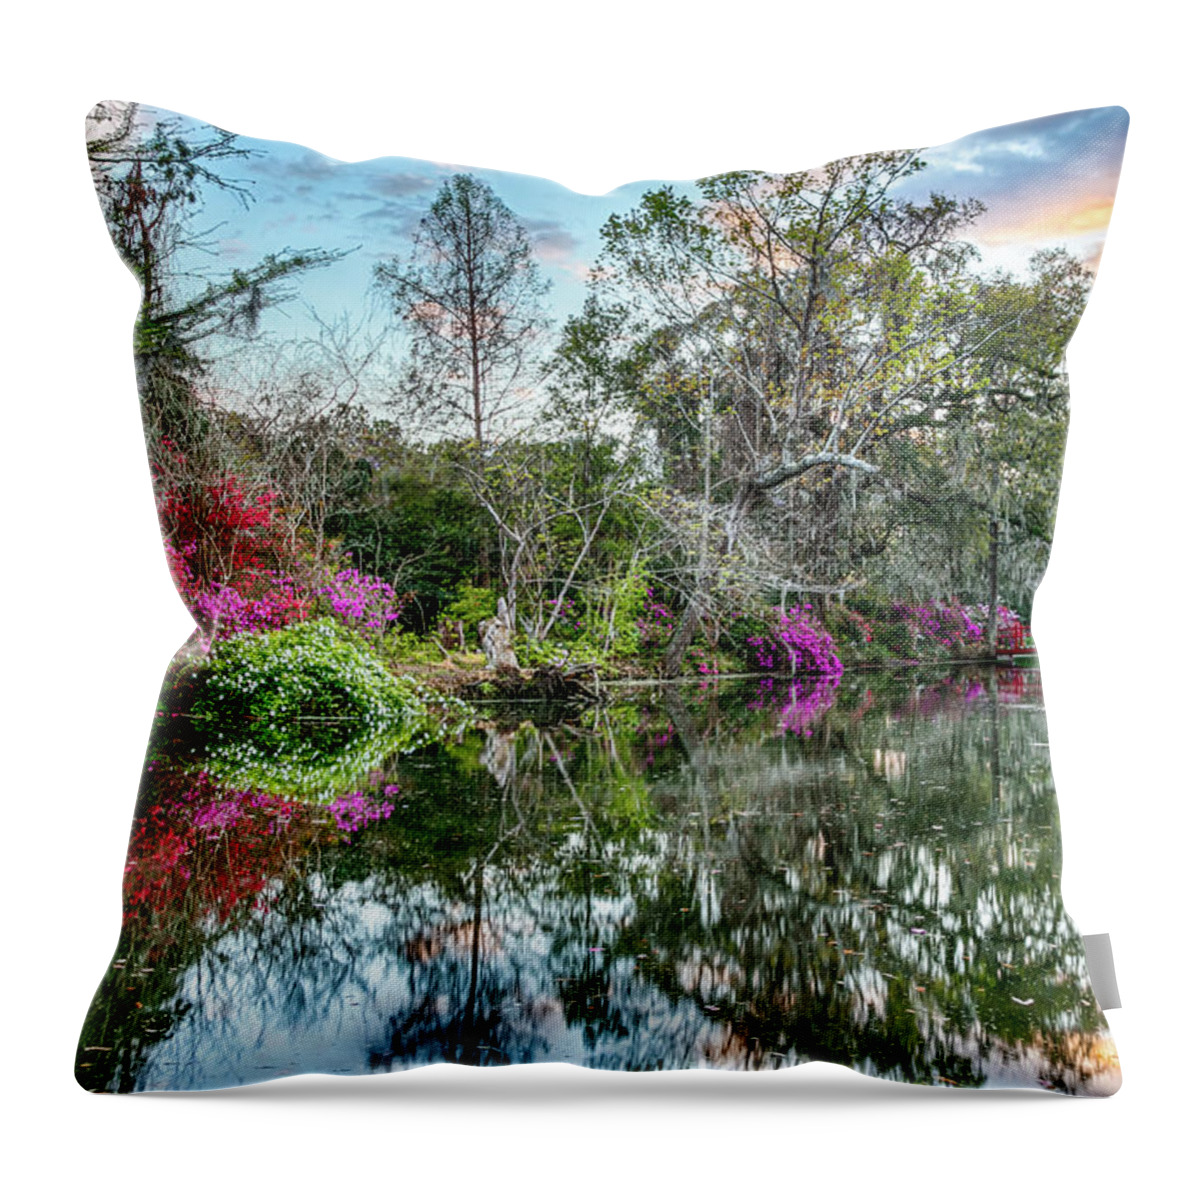  Throw Pillow featuring the photograph The Red Bridge at Sunset by Jim Miller